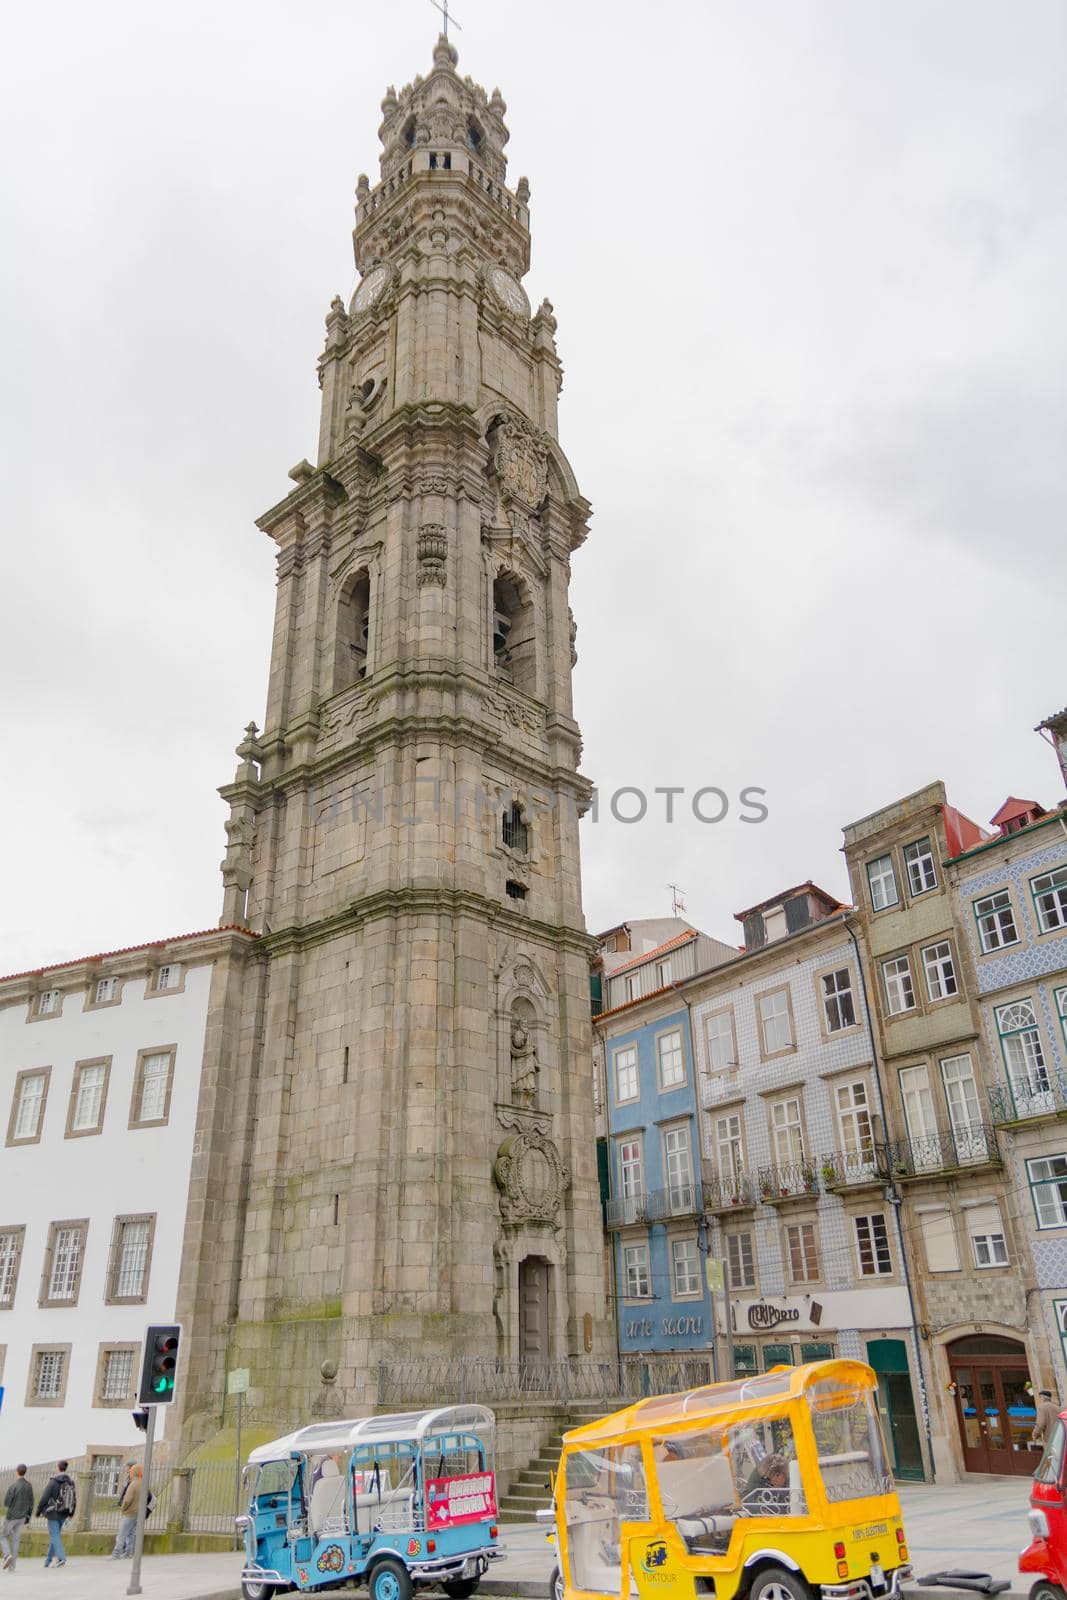 Porto,Portugal; 12/06/2016 : View of the beautiful baroque Church of Clerigos (Igreja dos Clerigos, in Portuguese) and iconic Clerigos Tower, one of the landmarks and symbols of Oporto city in Portugal. Sunset color in blue sky. by martinscphoto